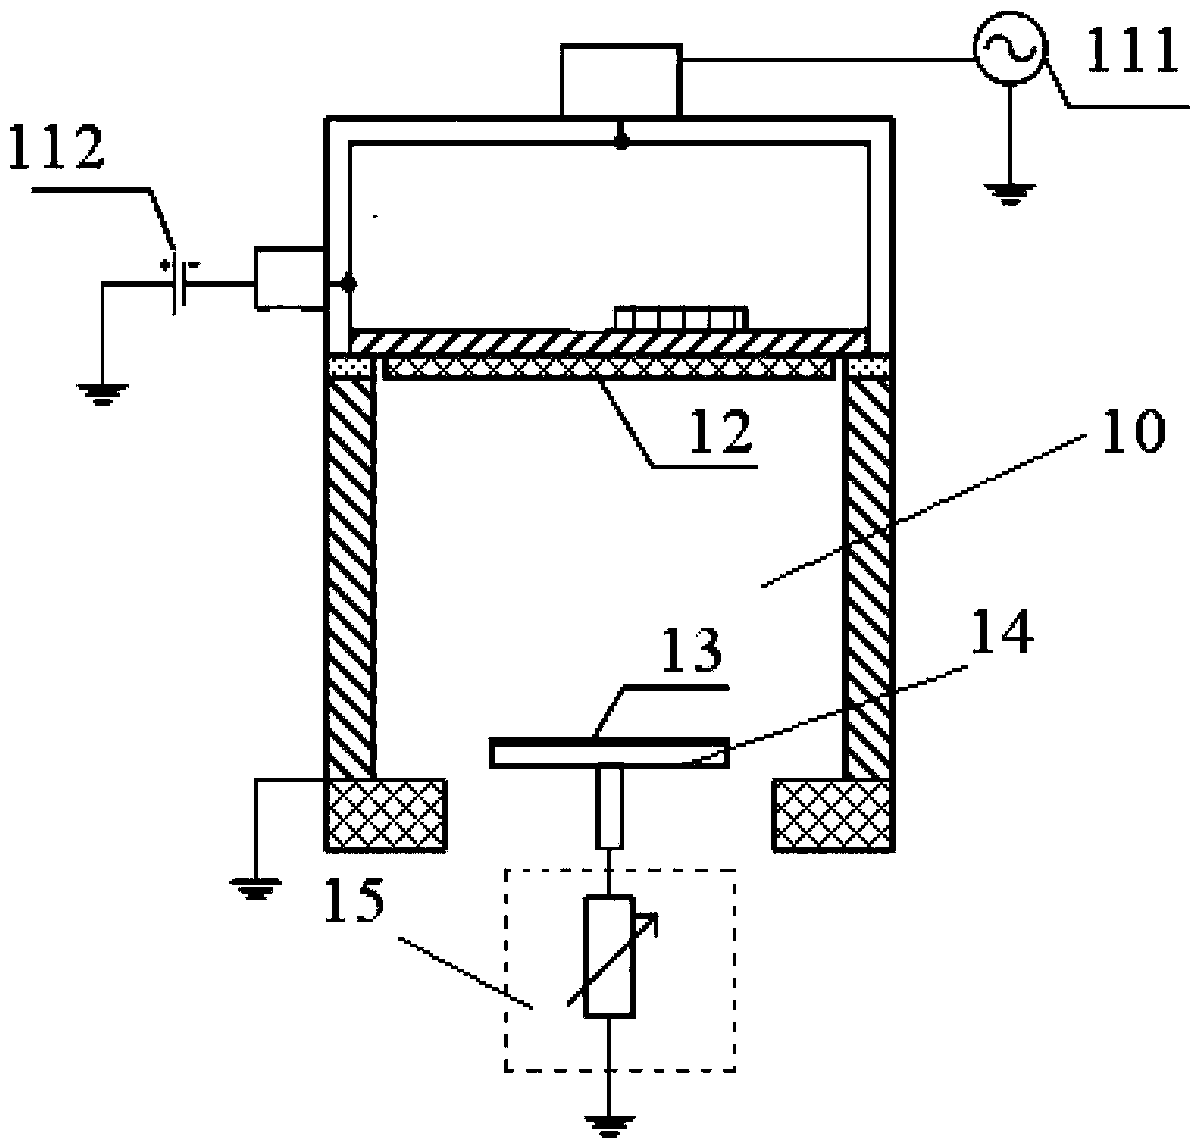 Magnetron sputtering equipment and method